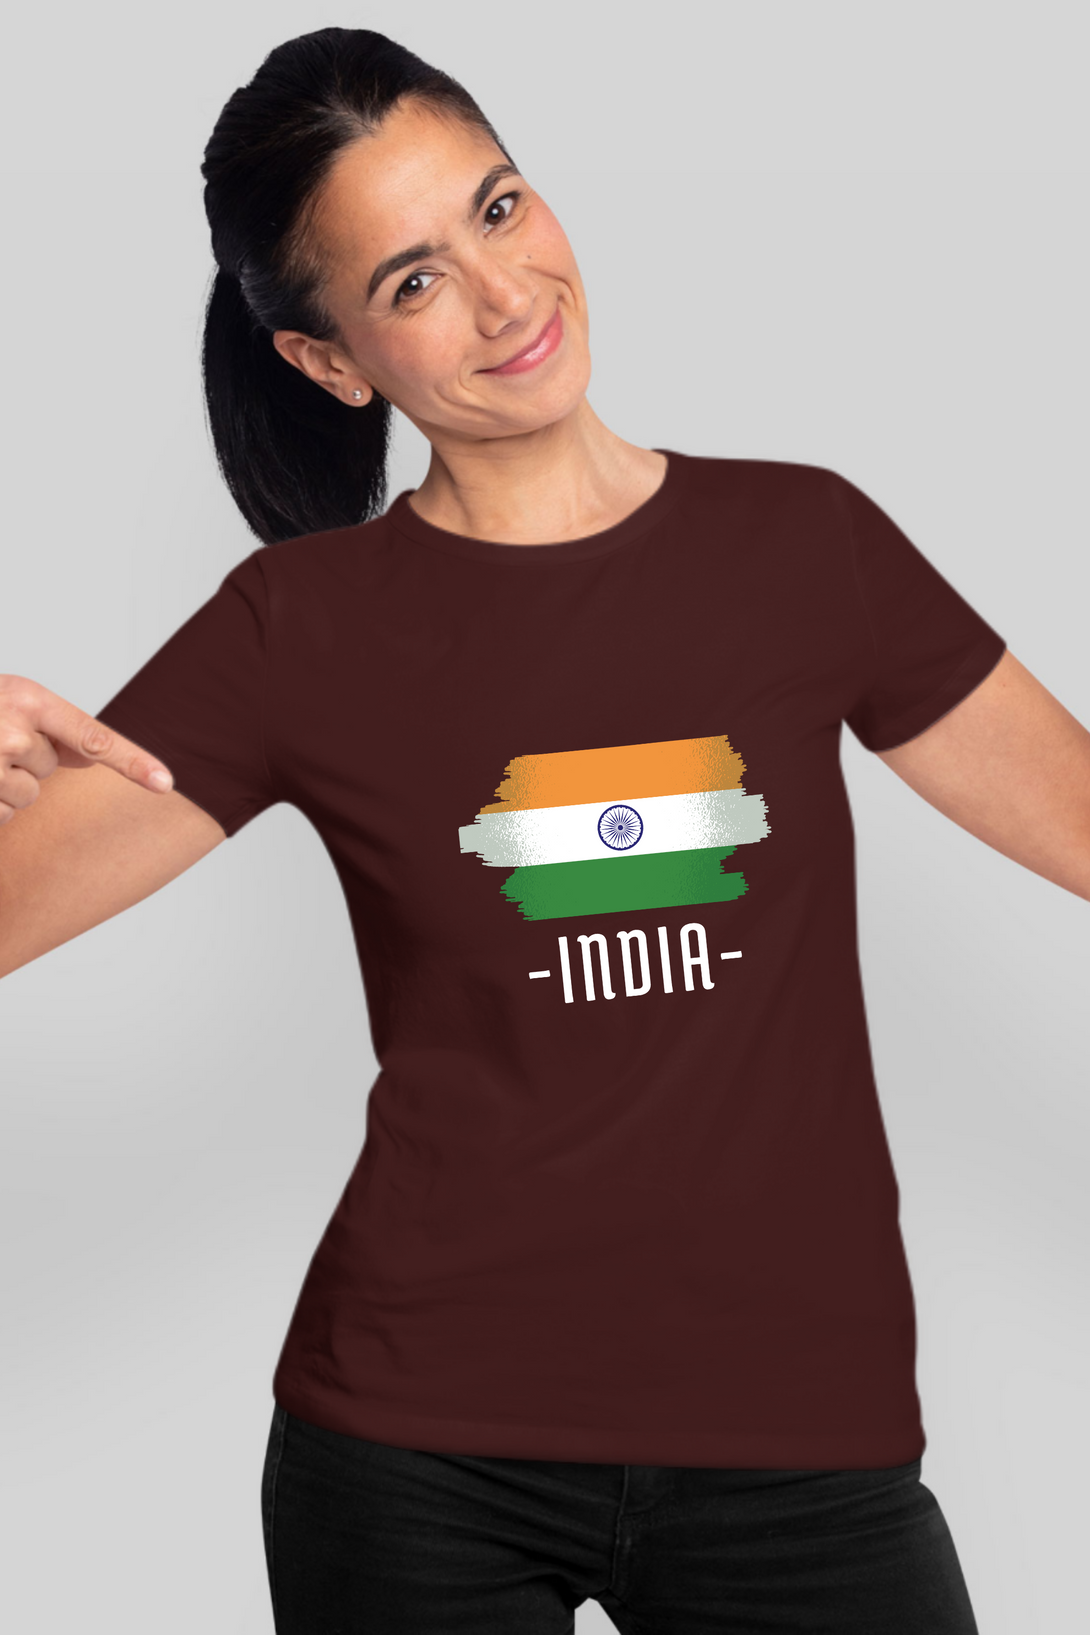 Proud Tricolor Printed T-Shirt For Women - WowWaves - 8